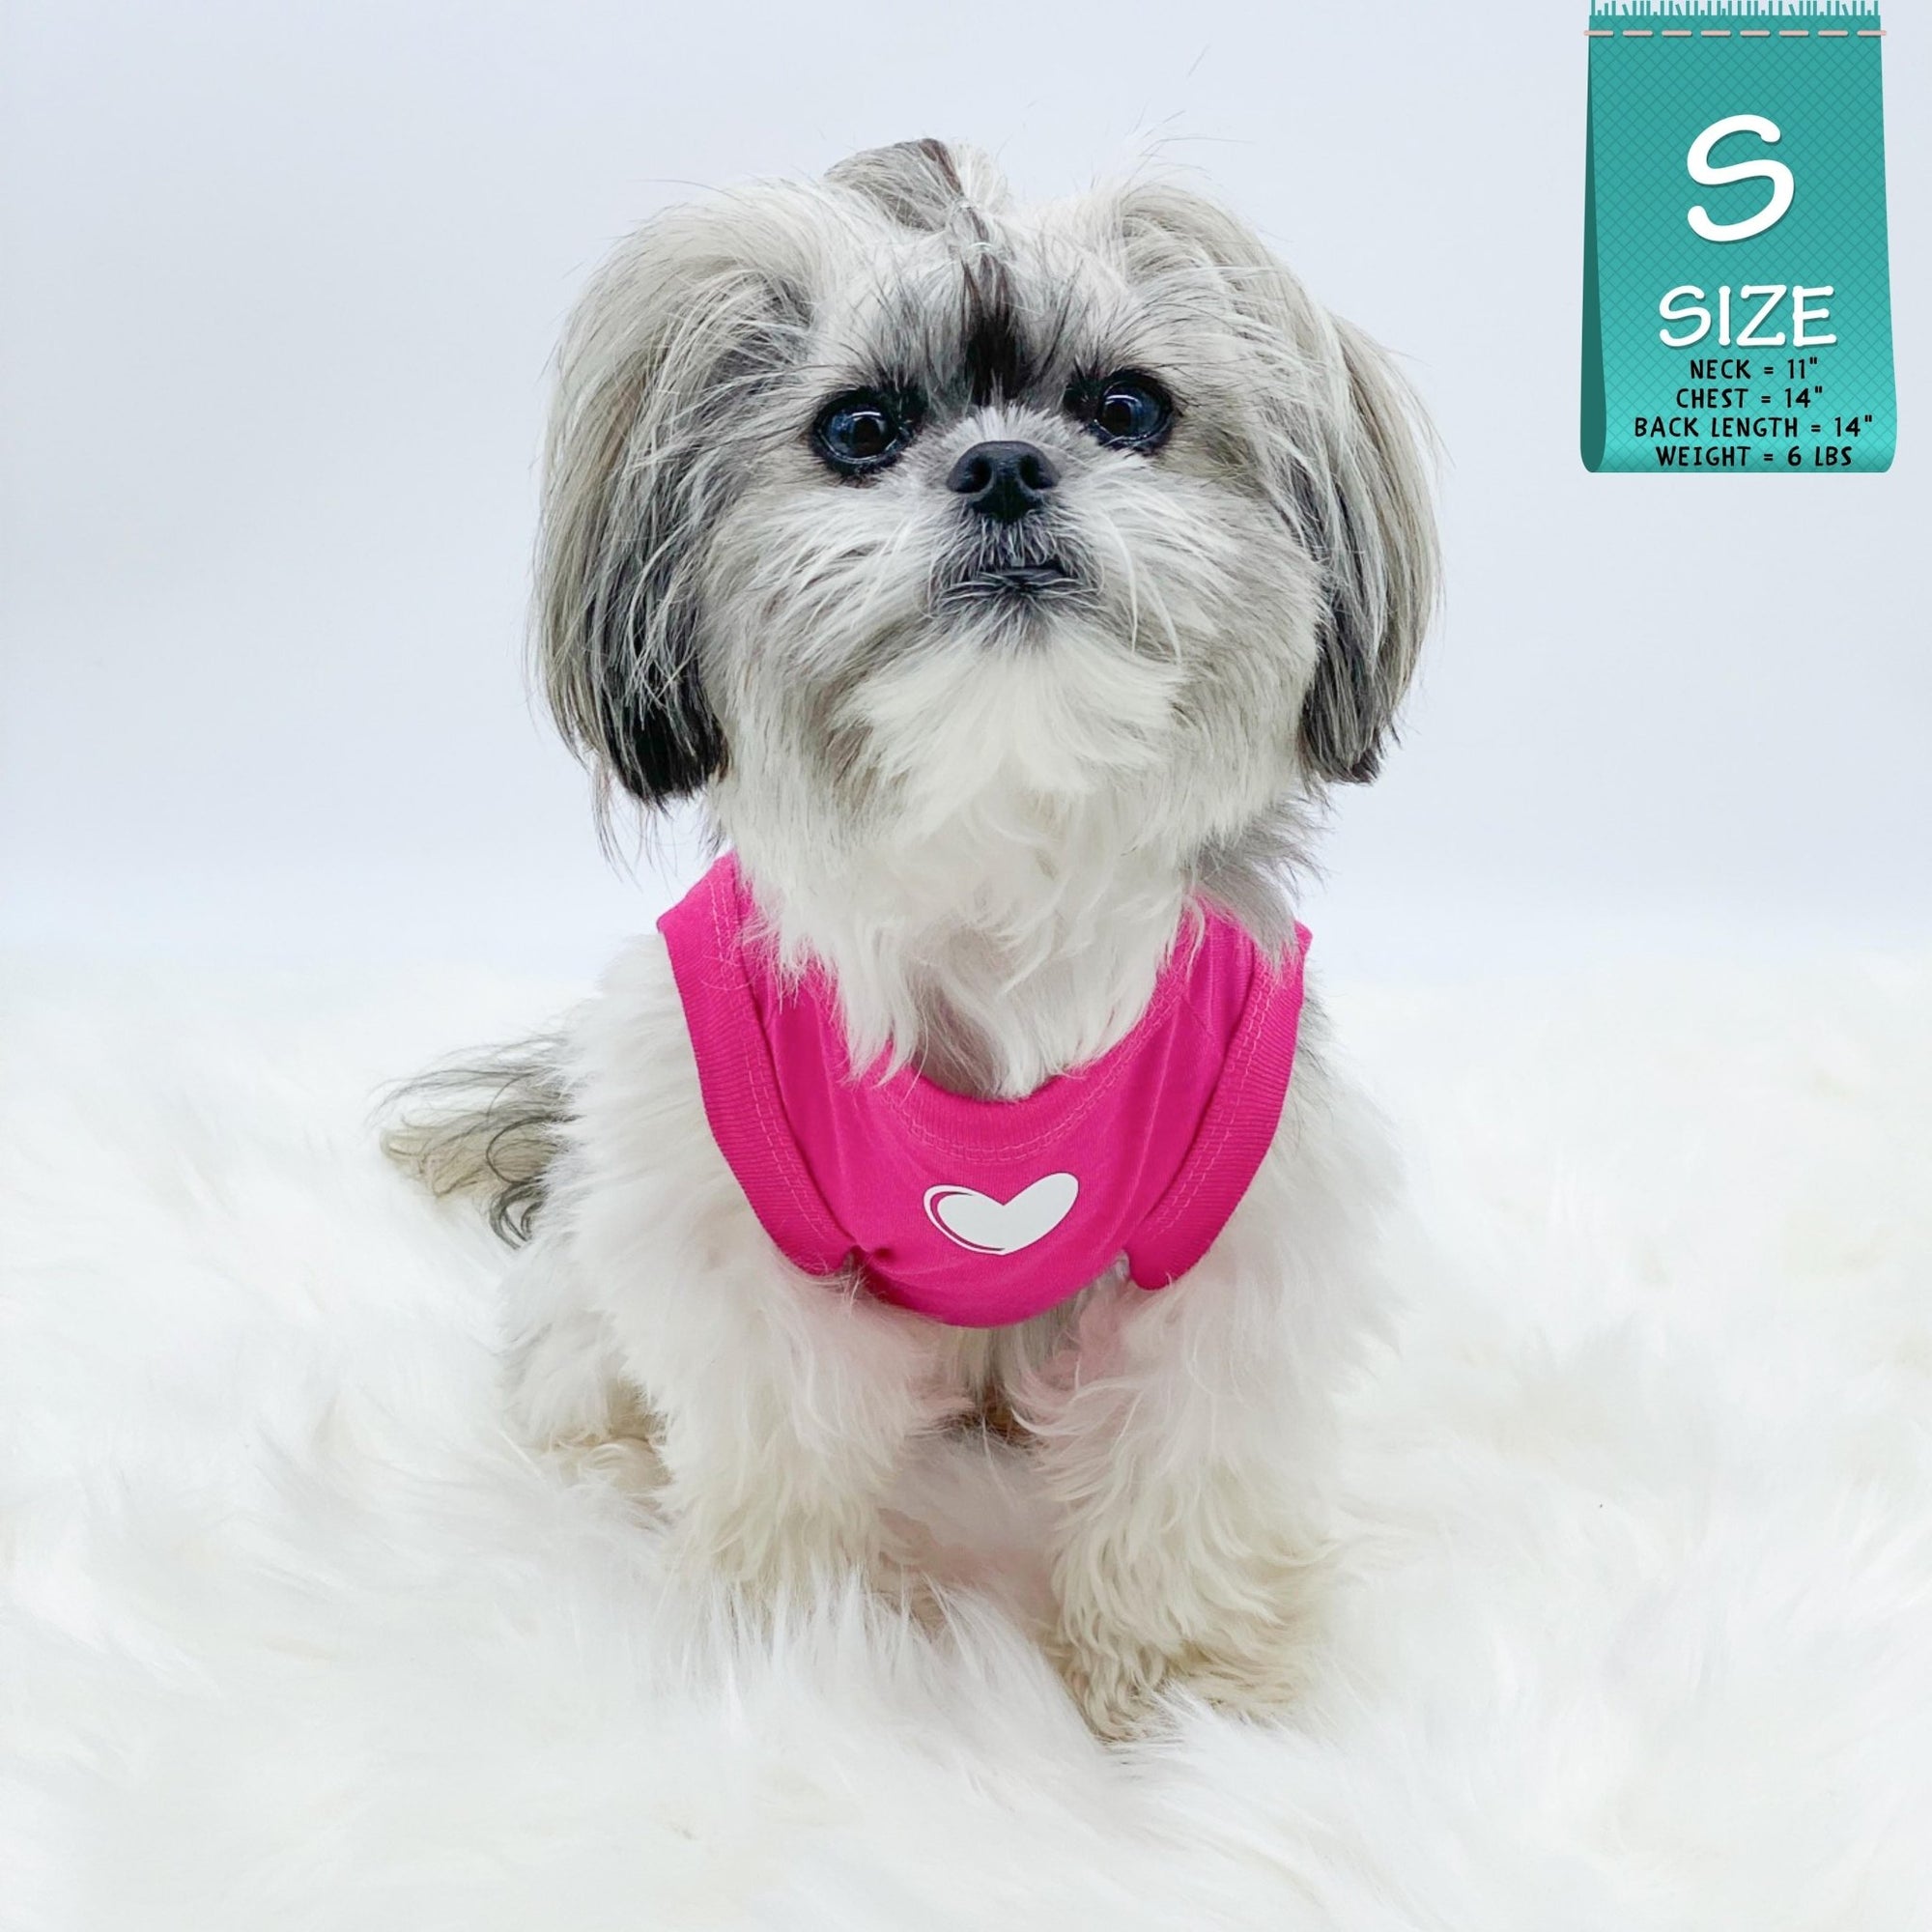 Dog T-Shirt - Shih Tzu mix wearing &quot;Spoiled&quot; dog t-shirt in hot pink with a solid white heart emoji on chest - against solid white background - Wag Trendz